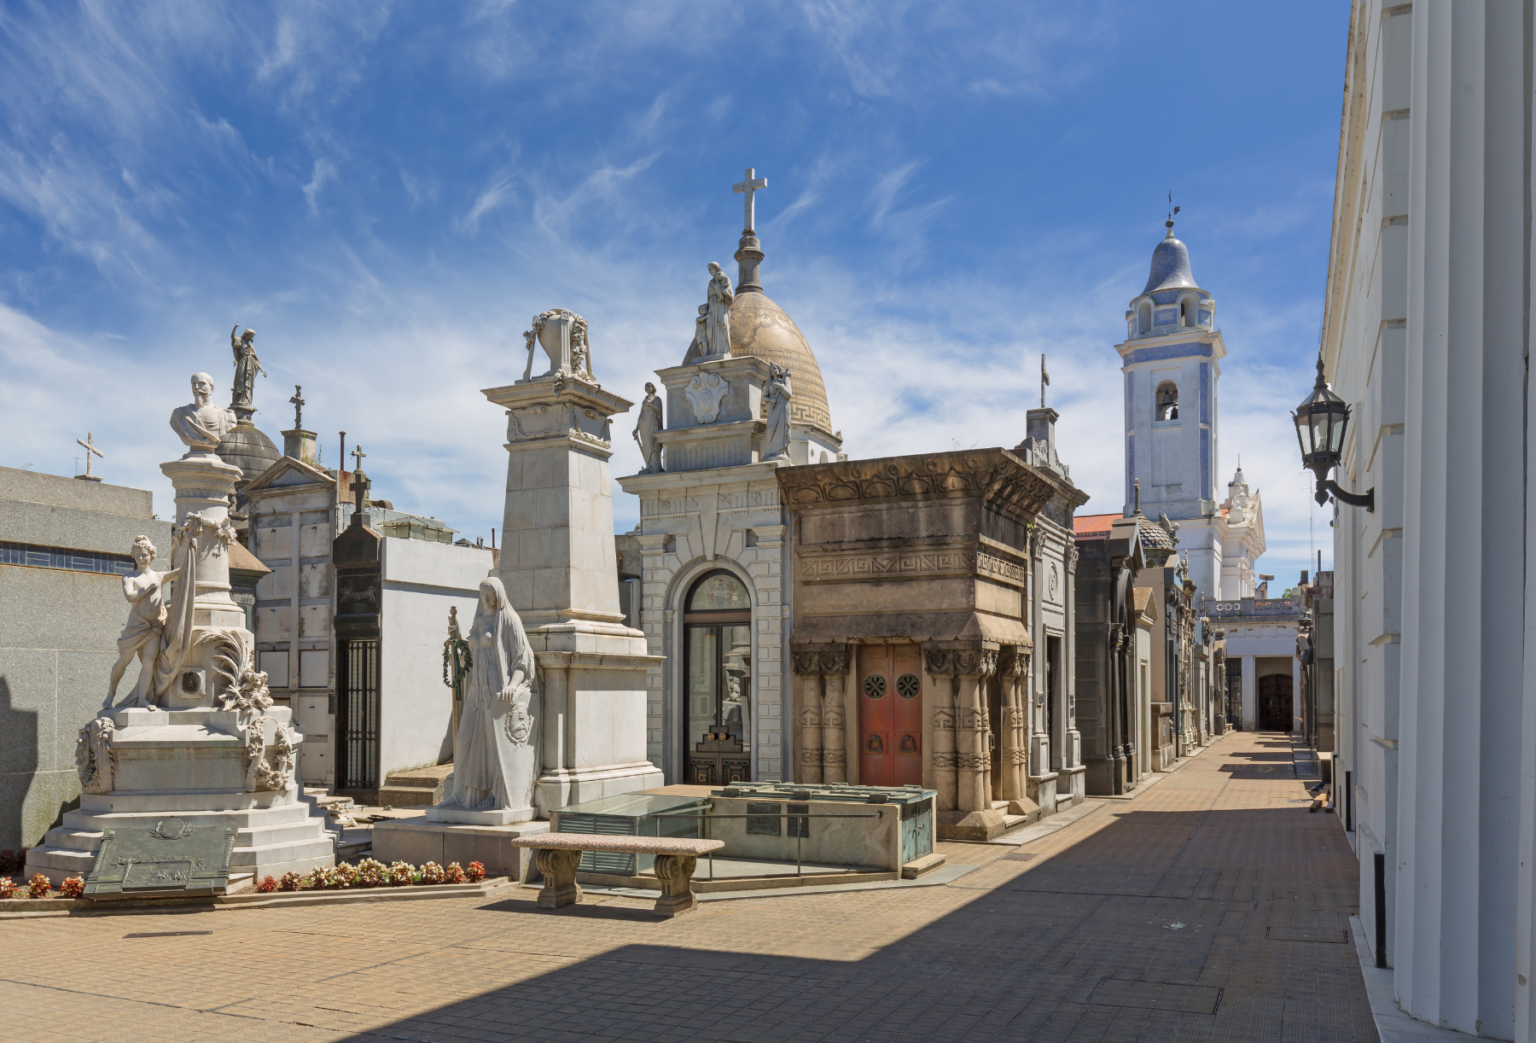 Marble mausoleums and statues